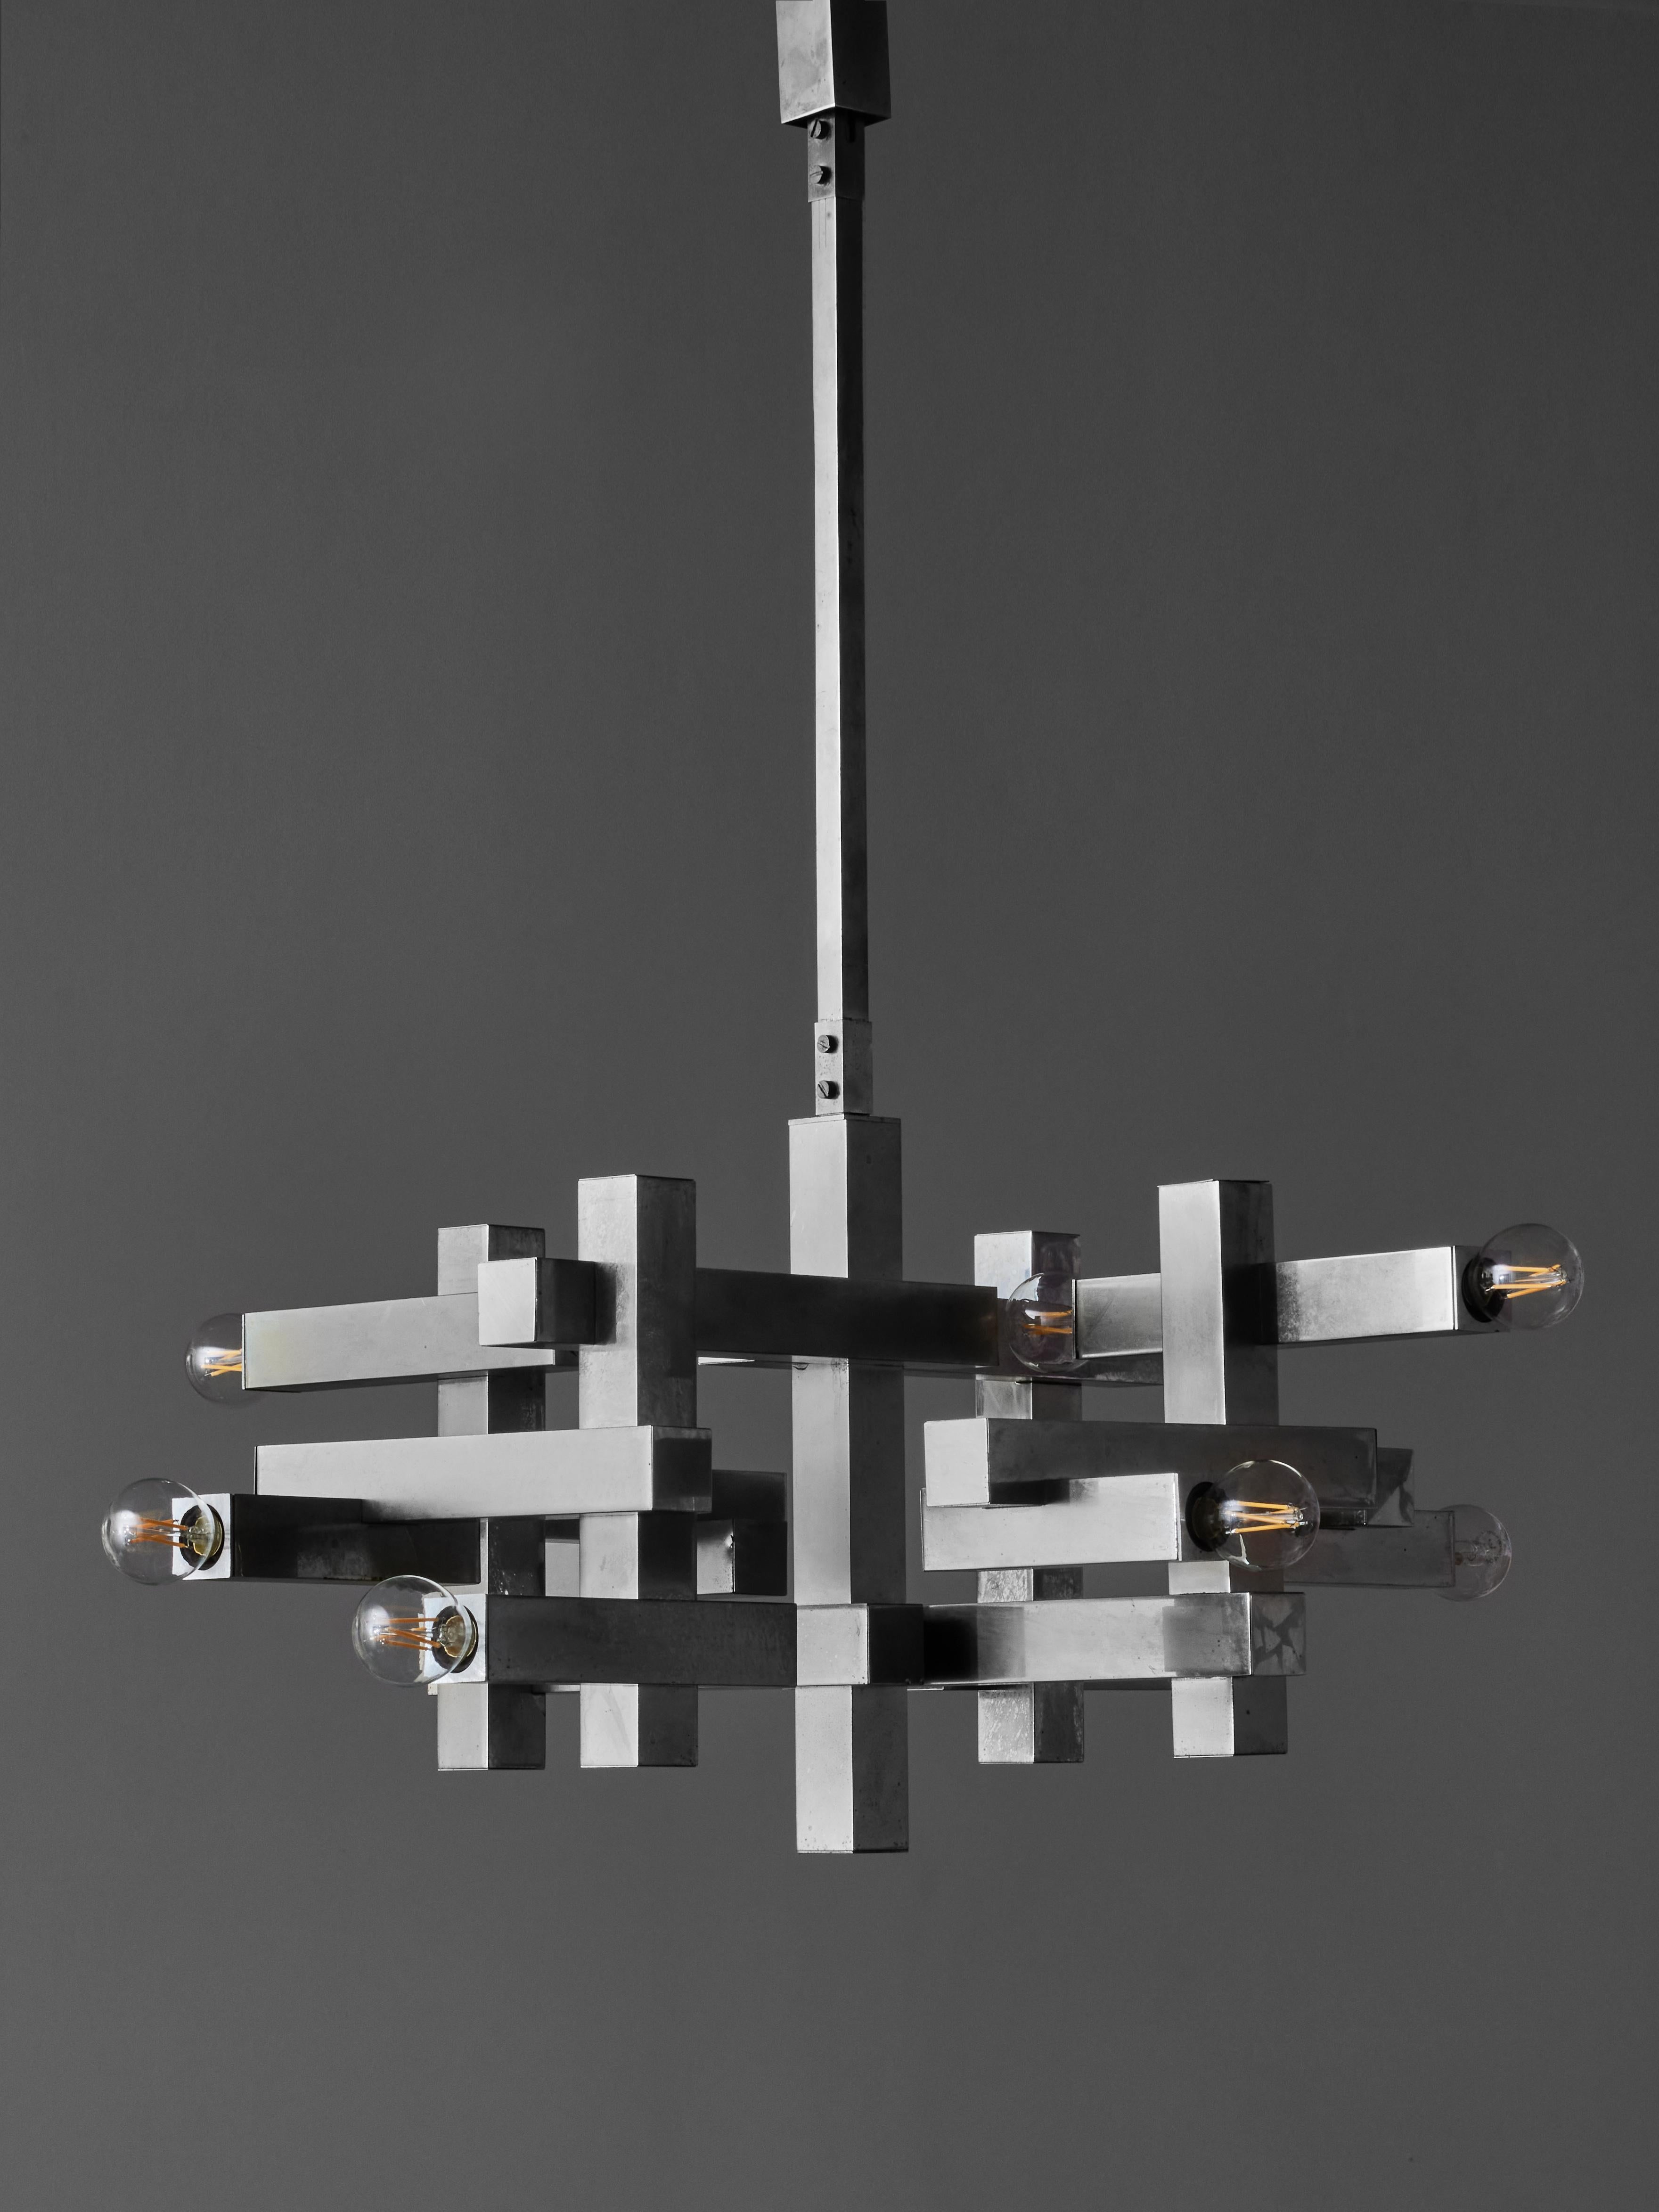 Pair of small cubist chandelier by Gaetano Sciolari made of square tubes geometrically assembled from which come out ten sources of light.

 

Angelo Gaetano Sciolari

Angelo Gaetano Sciolari (1927-1994) was the owner of Sciolari Lighting and